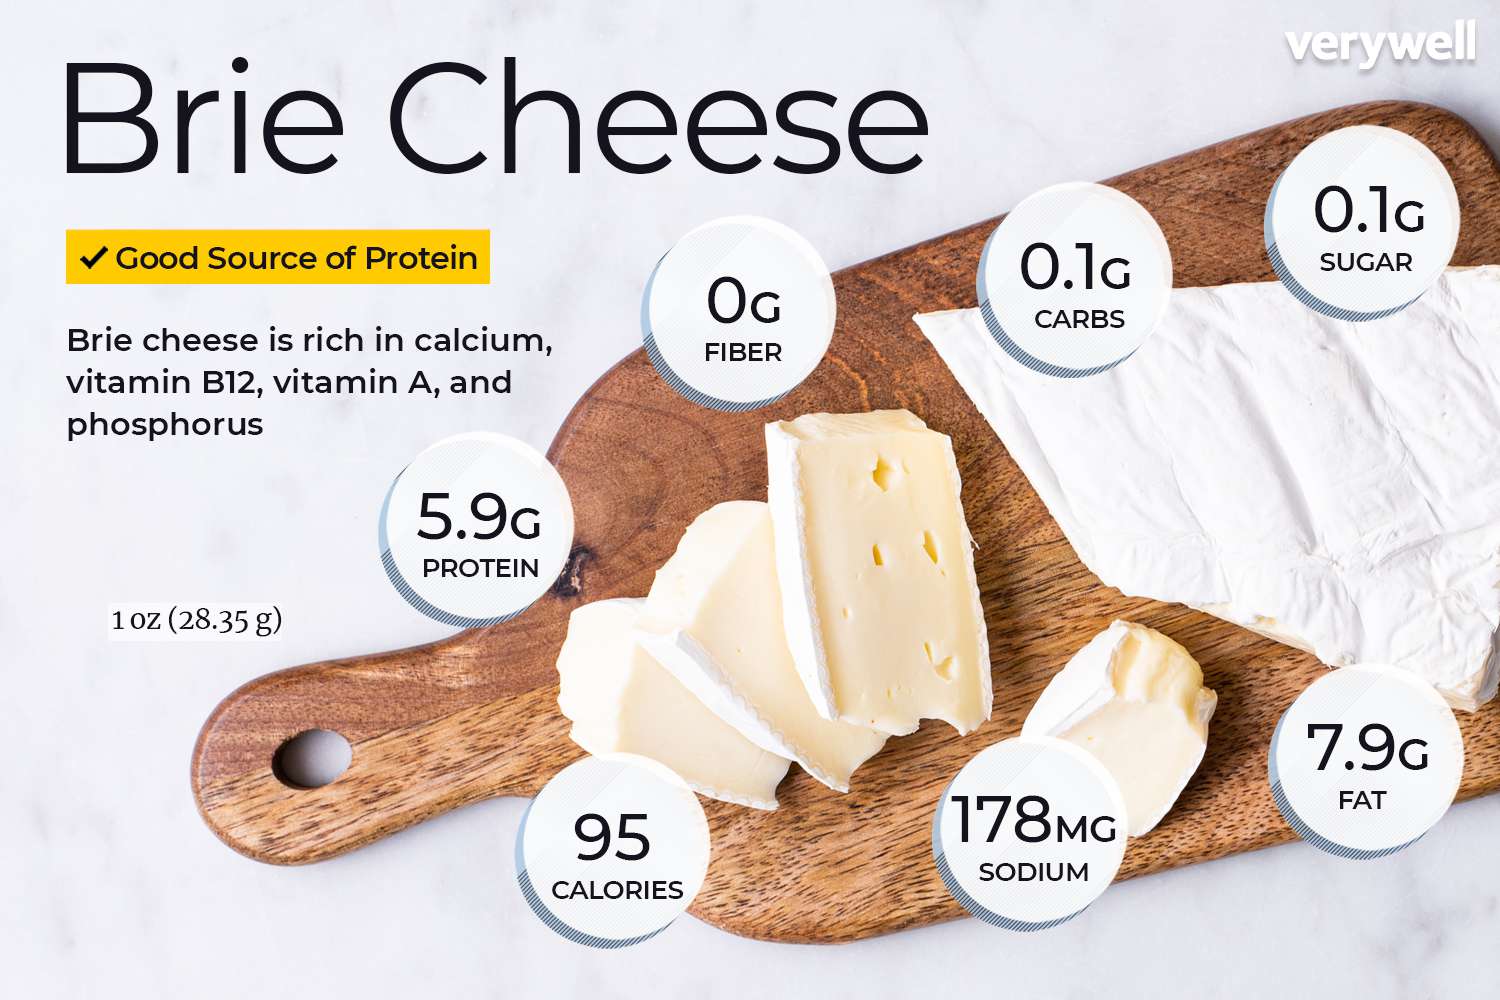 Brie cheese nutrition facts